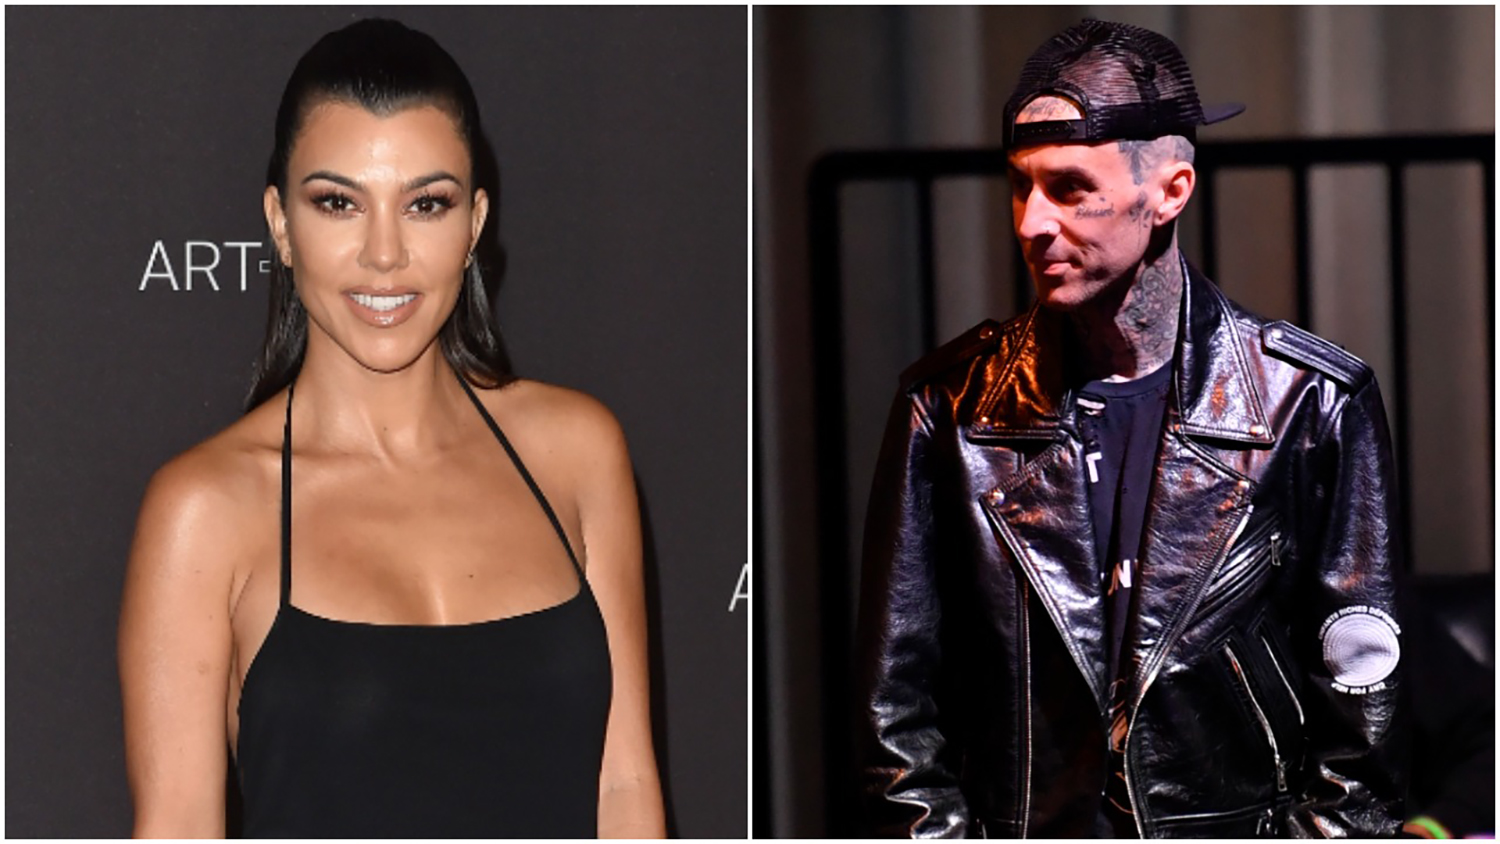 Kourtney Kardashian at the 2018 Film and Art Gala / Travis Barker at the UFC260 event in 2021